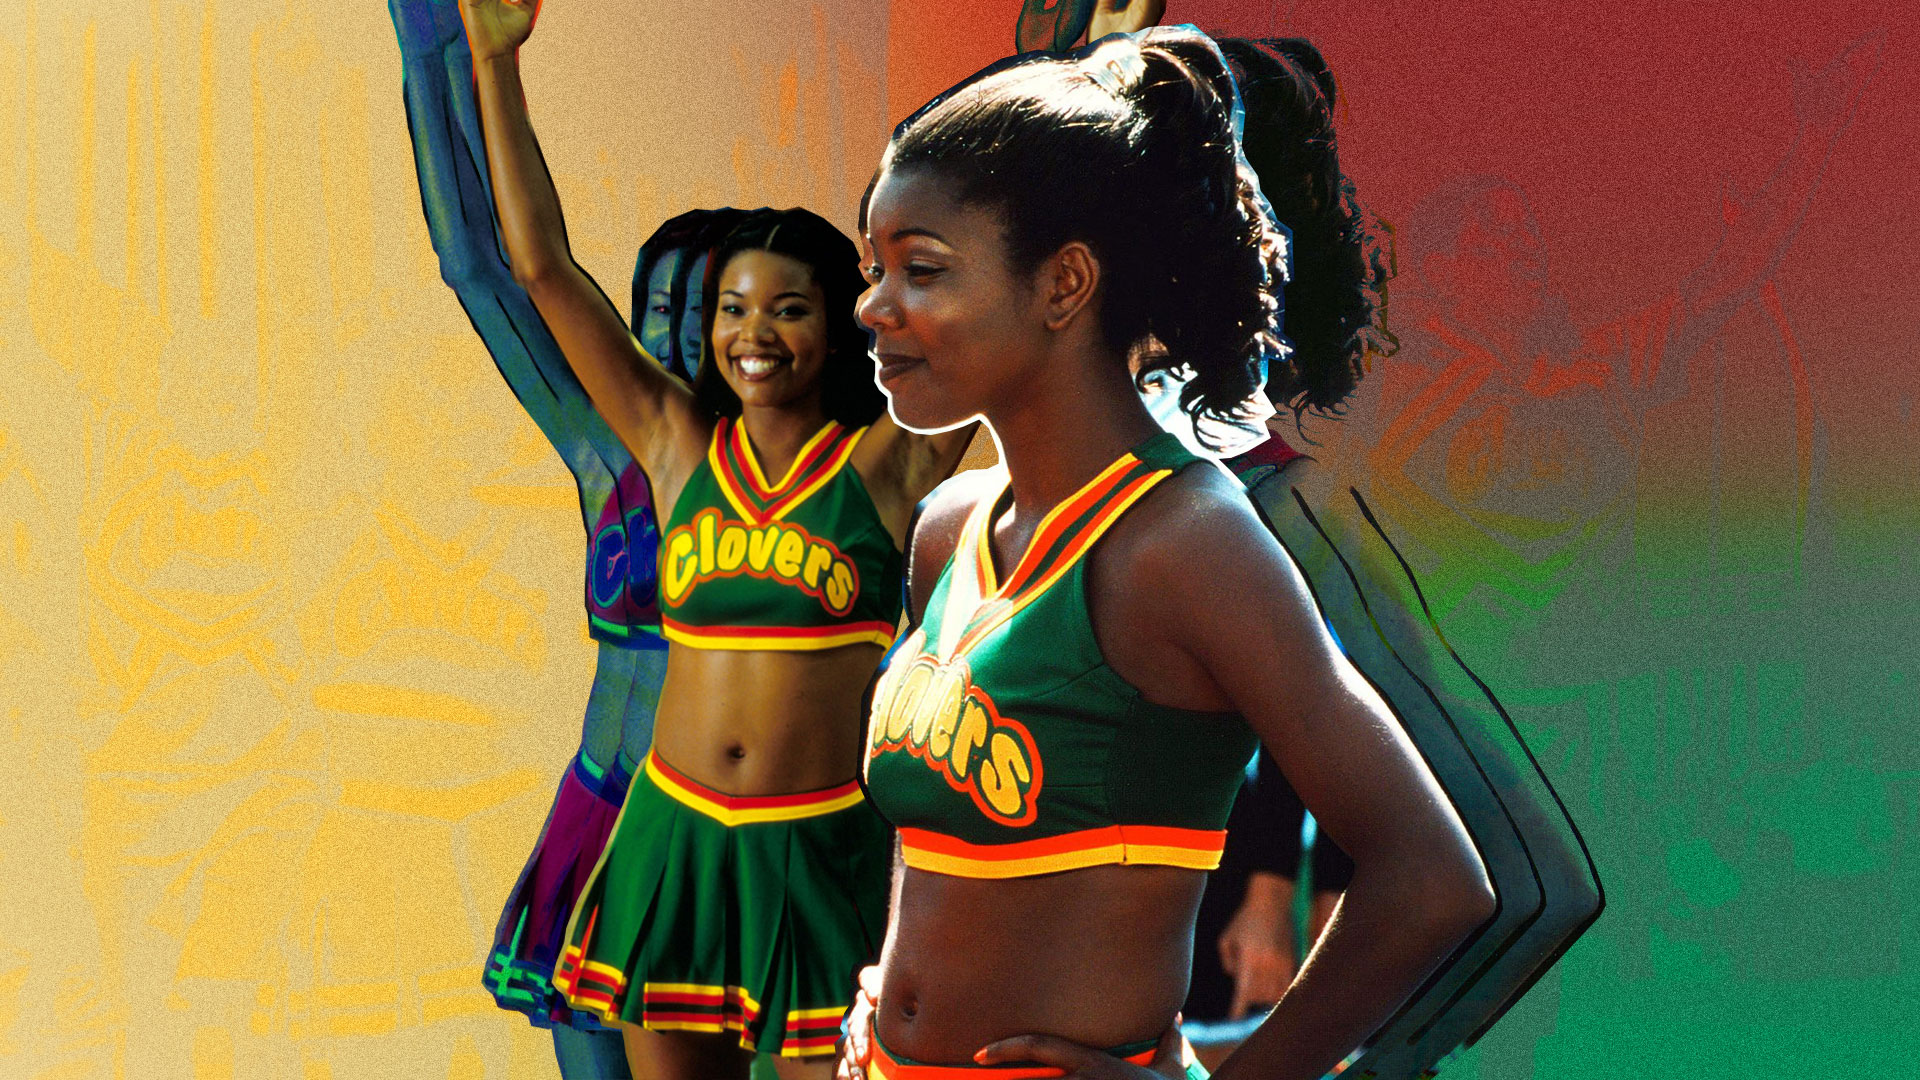 We Were Black Fished Gabrielle Union Exposes The Bring It On Franchise For The Misleading Trailer Guap The Home Of Emerging Creatives